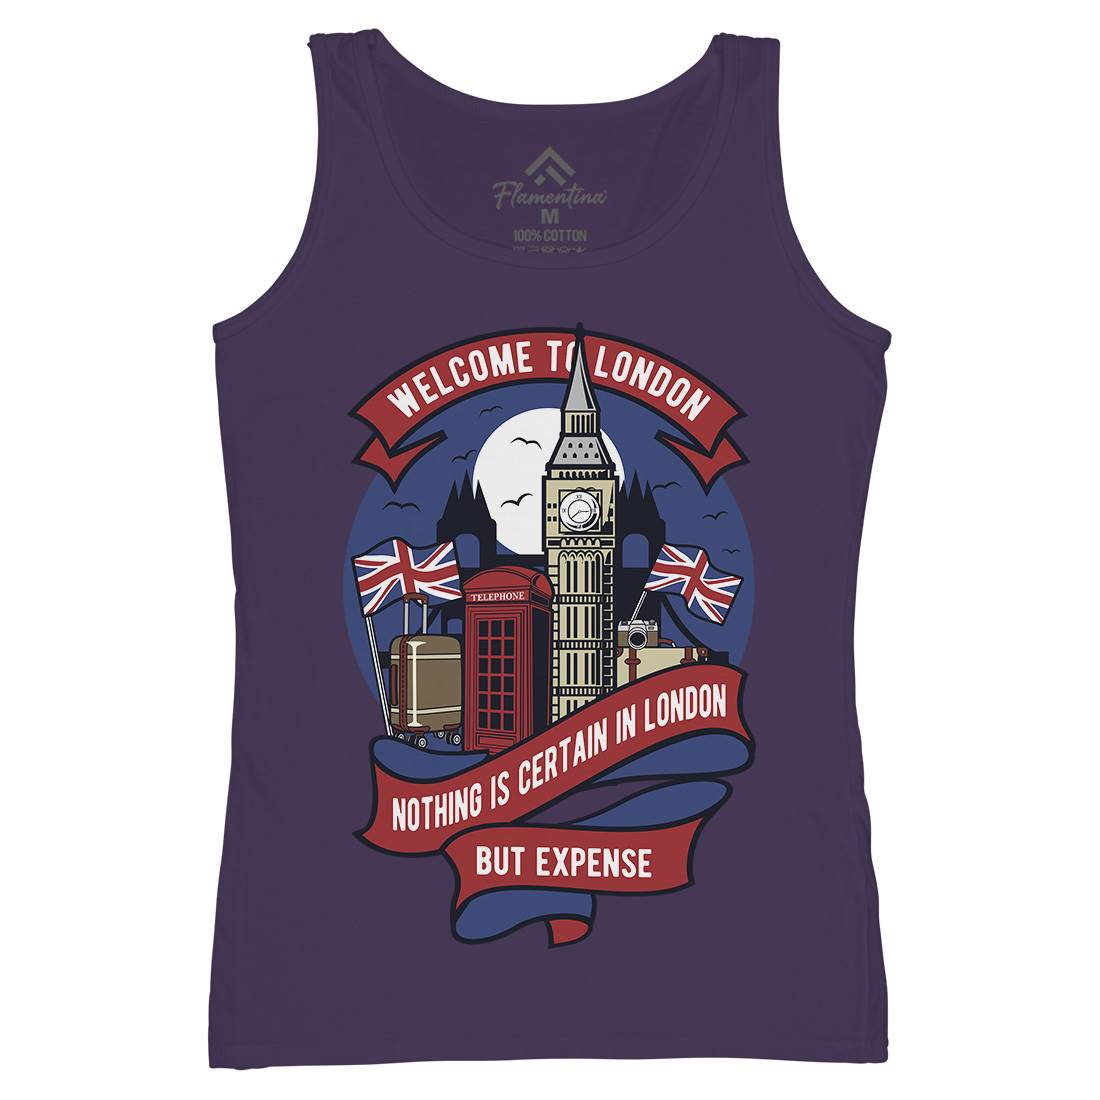 Welcome To London Womens Organic Tank Top Vest Retro D596